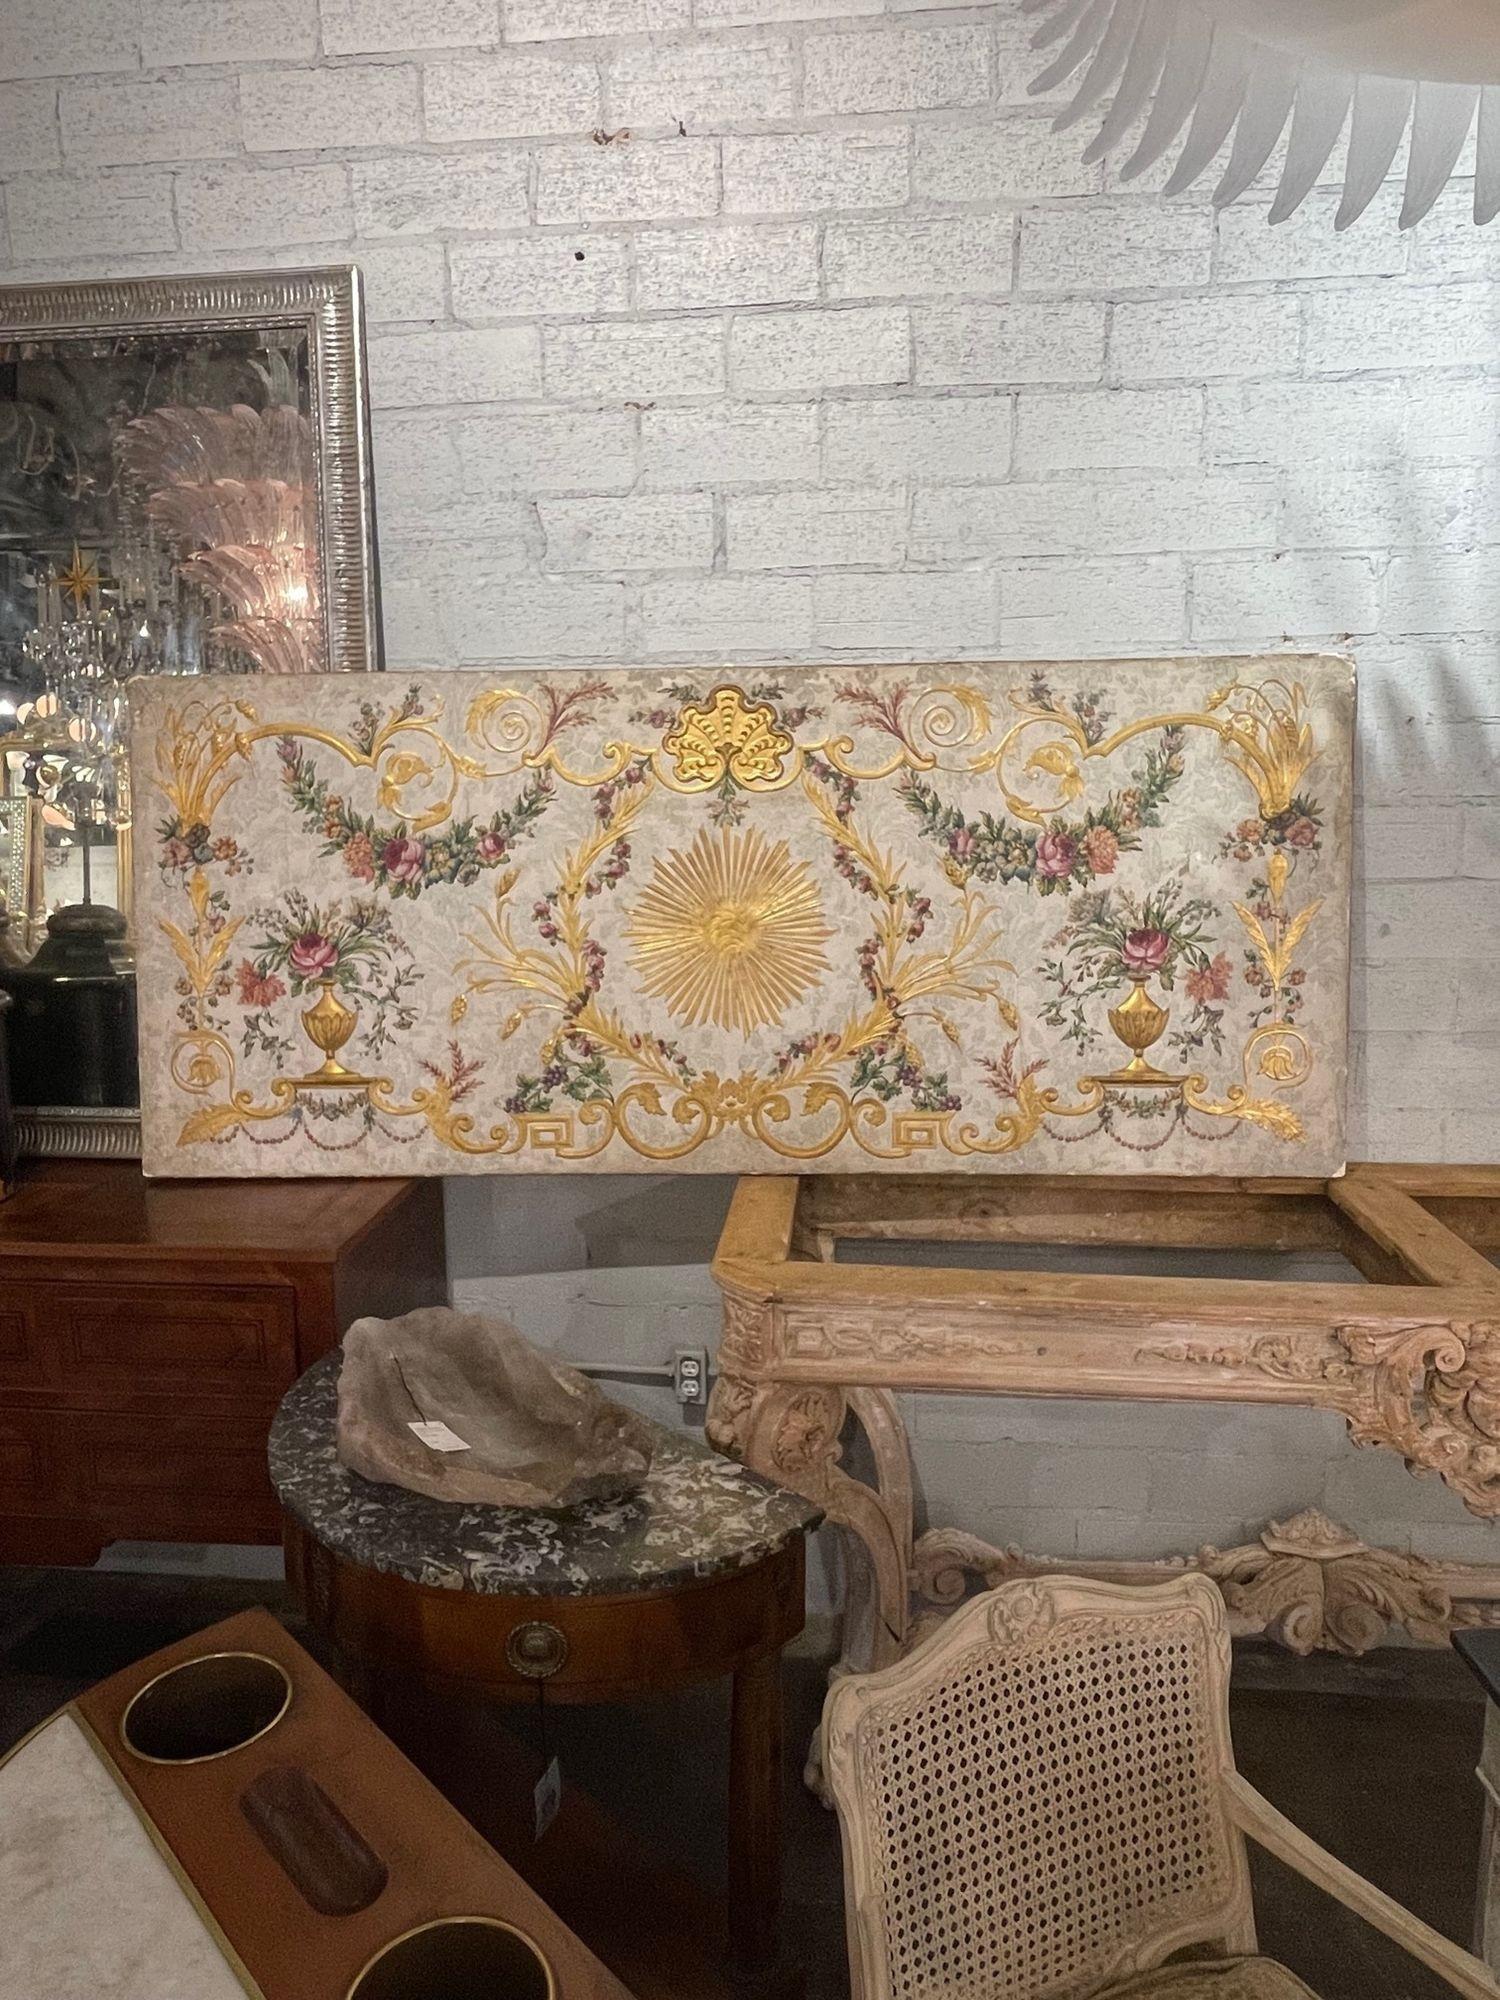 Outstanding 19th century Italian raised gilt gesso and oil painted panel. Very pretty images of leaves, flowers and urns. An exceptional piece!